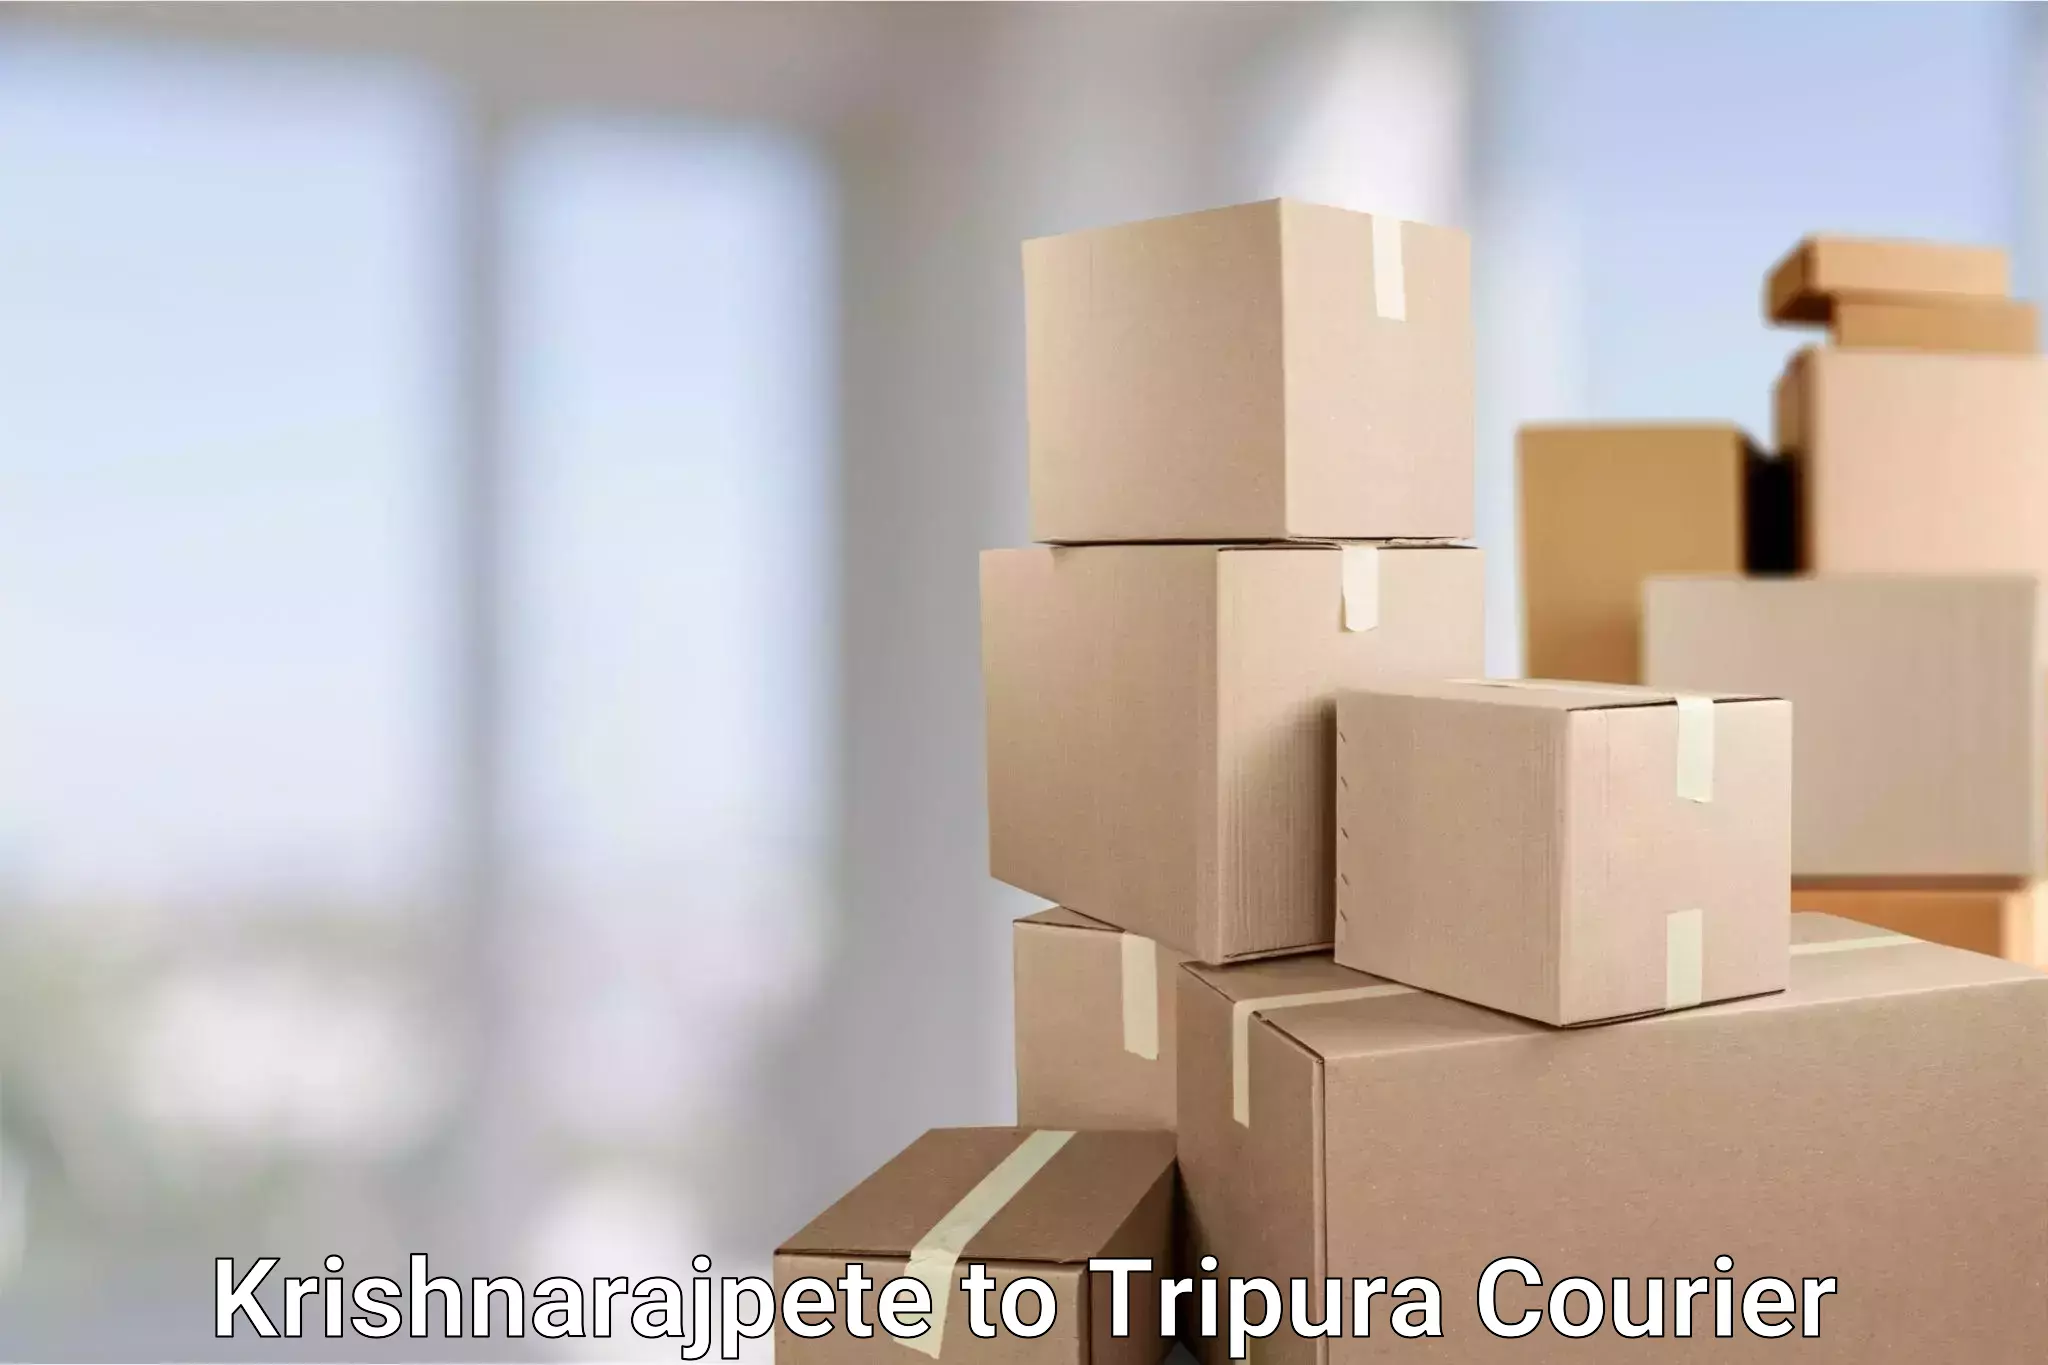 Express package delivery Krishnarajpete to Udaipur Tripura